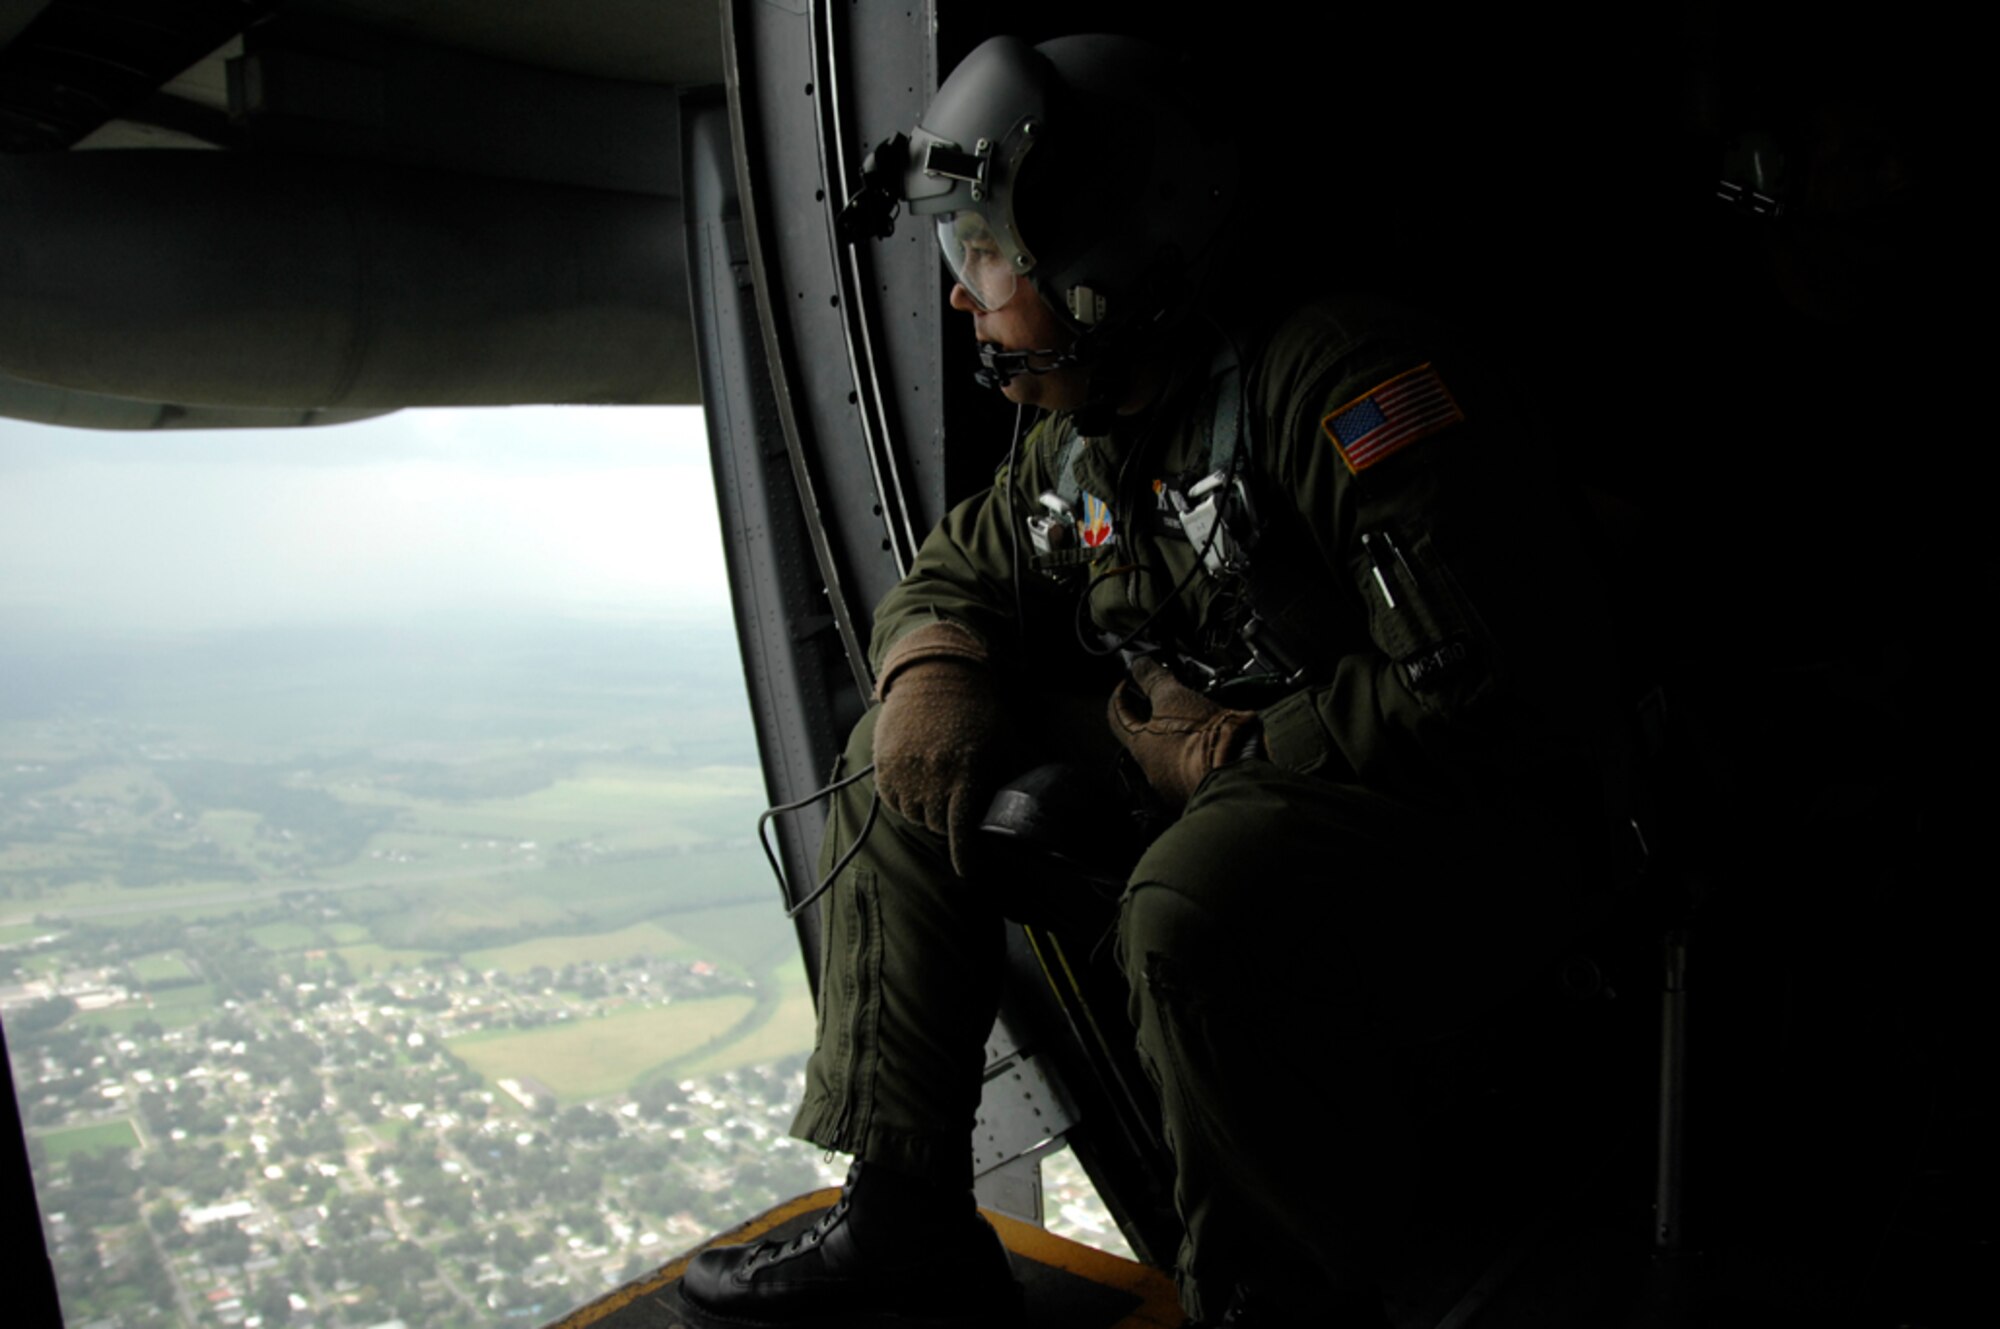 Tech. Sgt. Eric Valdez, 129th Rescue Wing loadmaster, scans the ground in Louisiana for civilian victims in need of rescue Sept. 2.  More than 80 Airmen from the 129th RQW deployed to Ellington Field, Texas, as part of Joint Task Force 129, which supported Hurricane Gustav rescue operations. Air National Guardsmen from the 106th Rescue Wing, Gabreski Airport, N.Y., and 176th Wing, Kulis Air National Guard Base, Alaska, were also part of the rescue task force. (U.S. Air Force photo by Tech. Sgt. Ray Aquino)